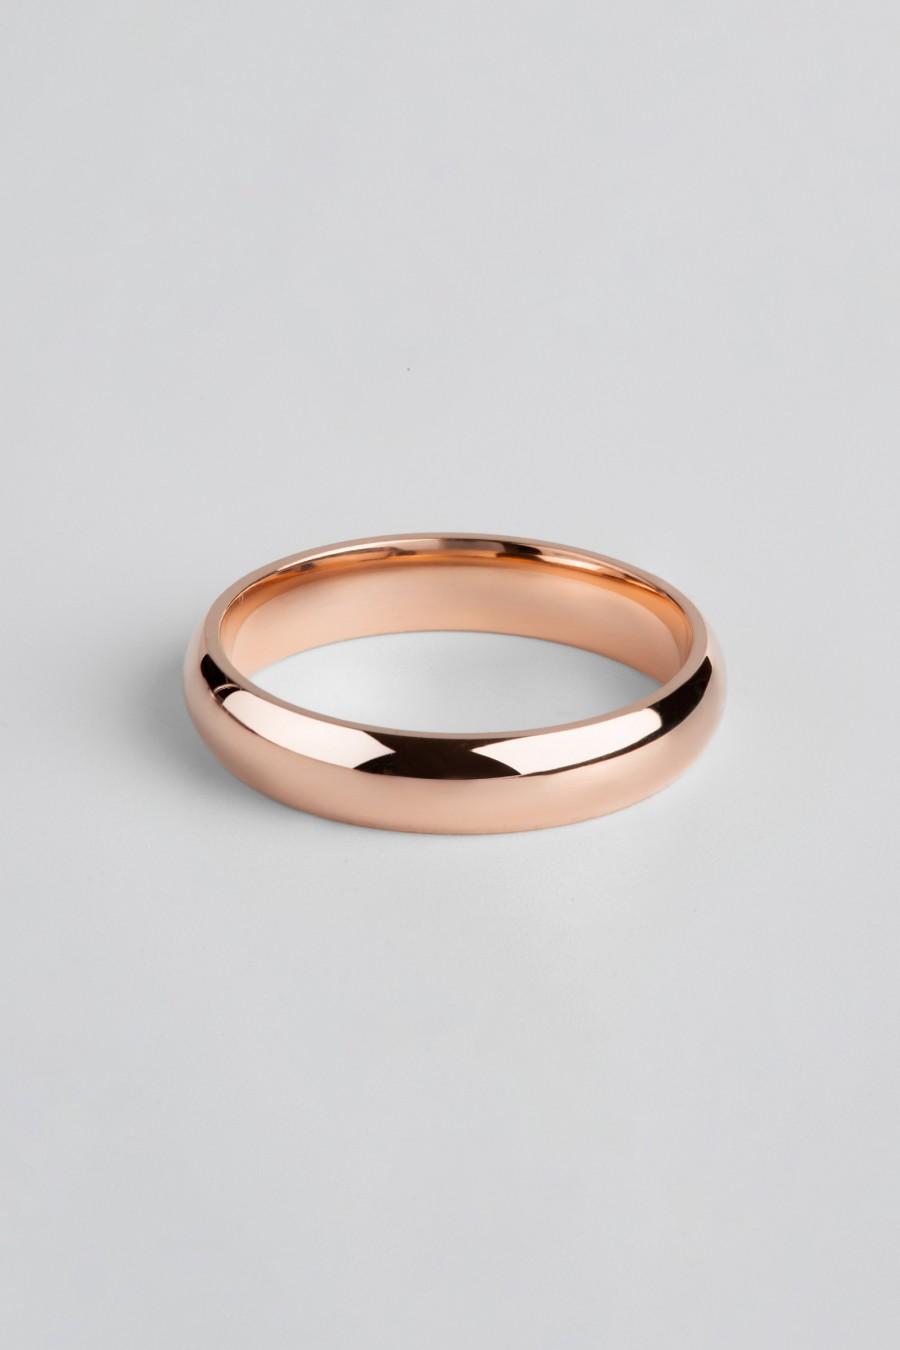 Wedding - 14k Rose Gold Band - CLASSIC DOME / Polished / Comfort Fit / Men's Women's Wedding Ring / Simple Wedding Ring